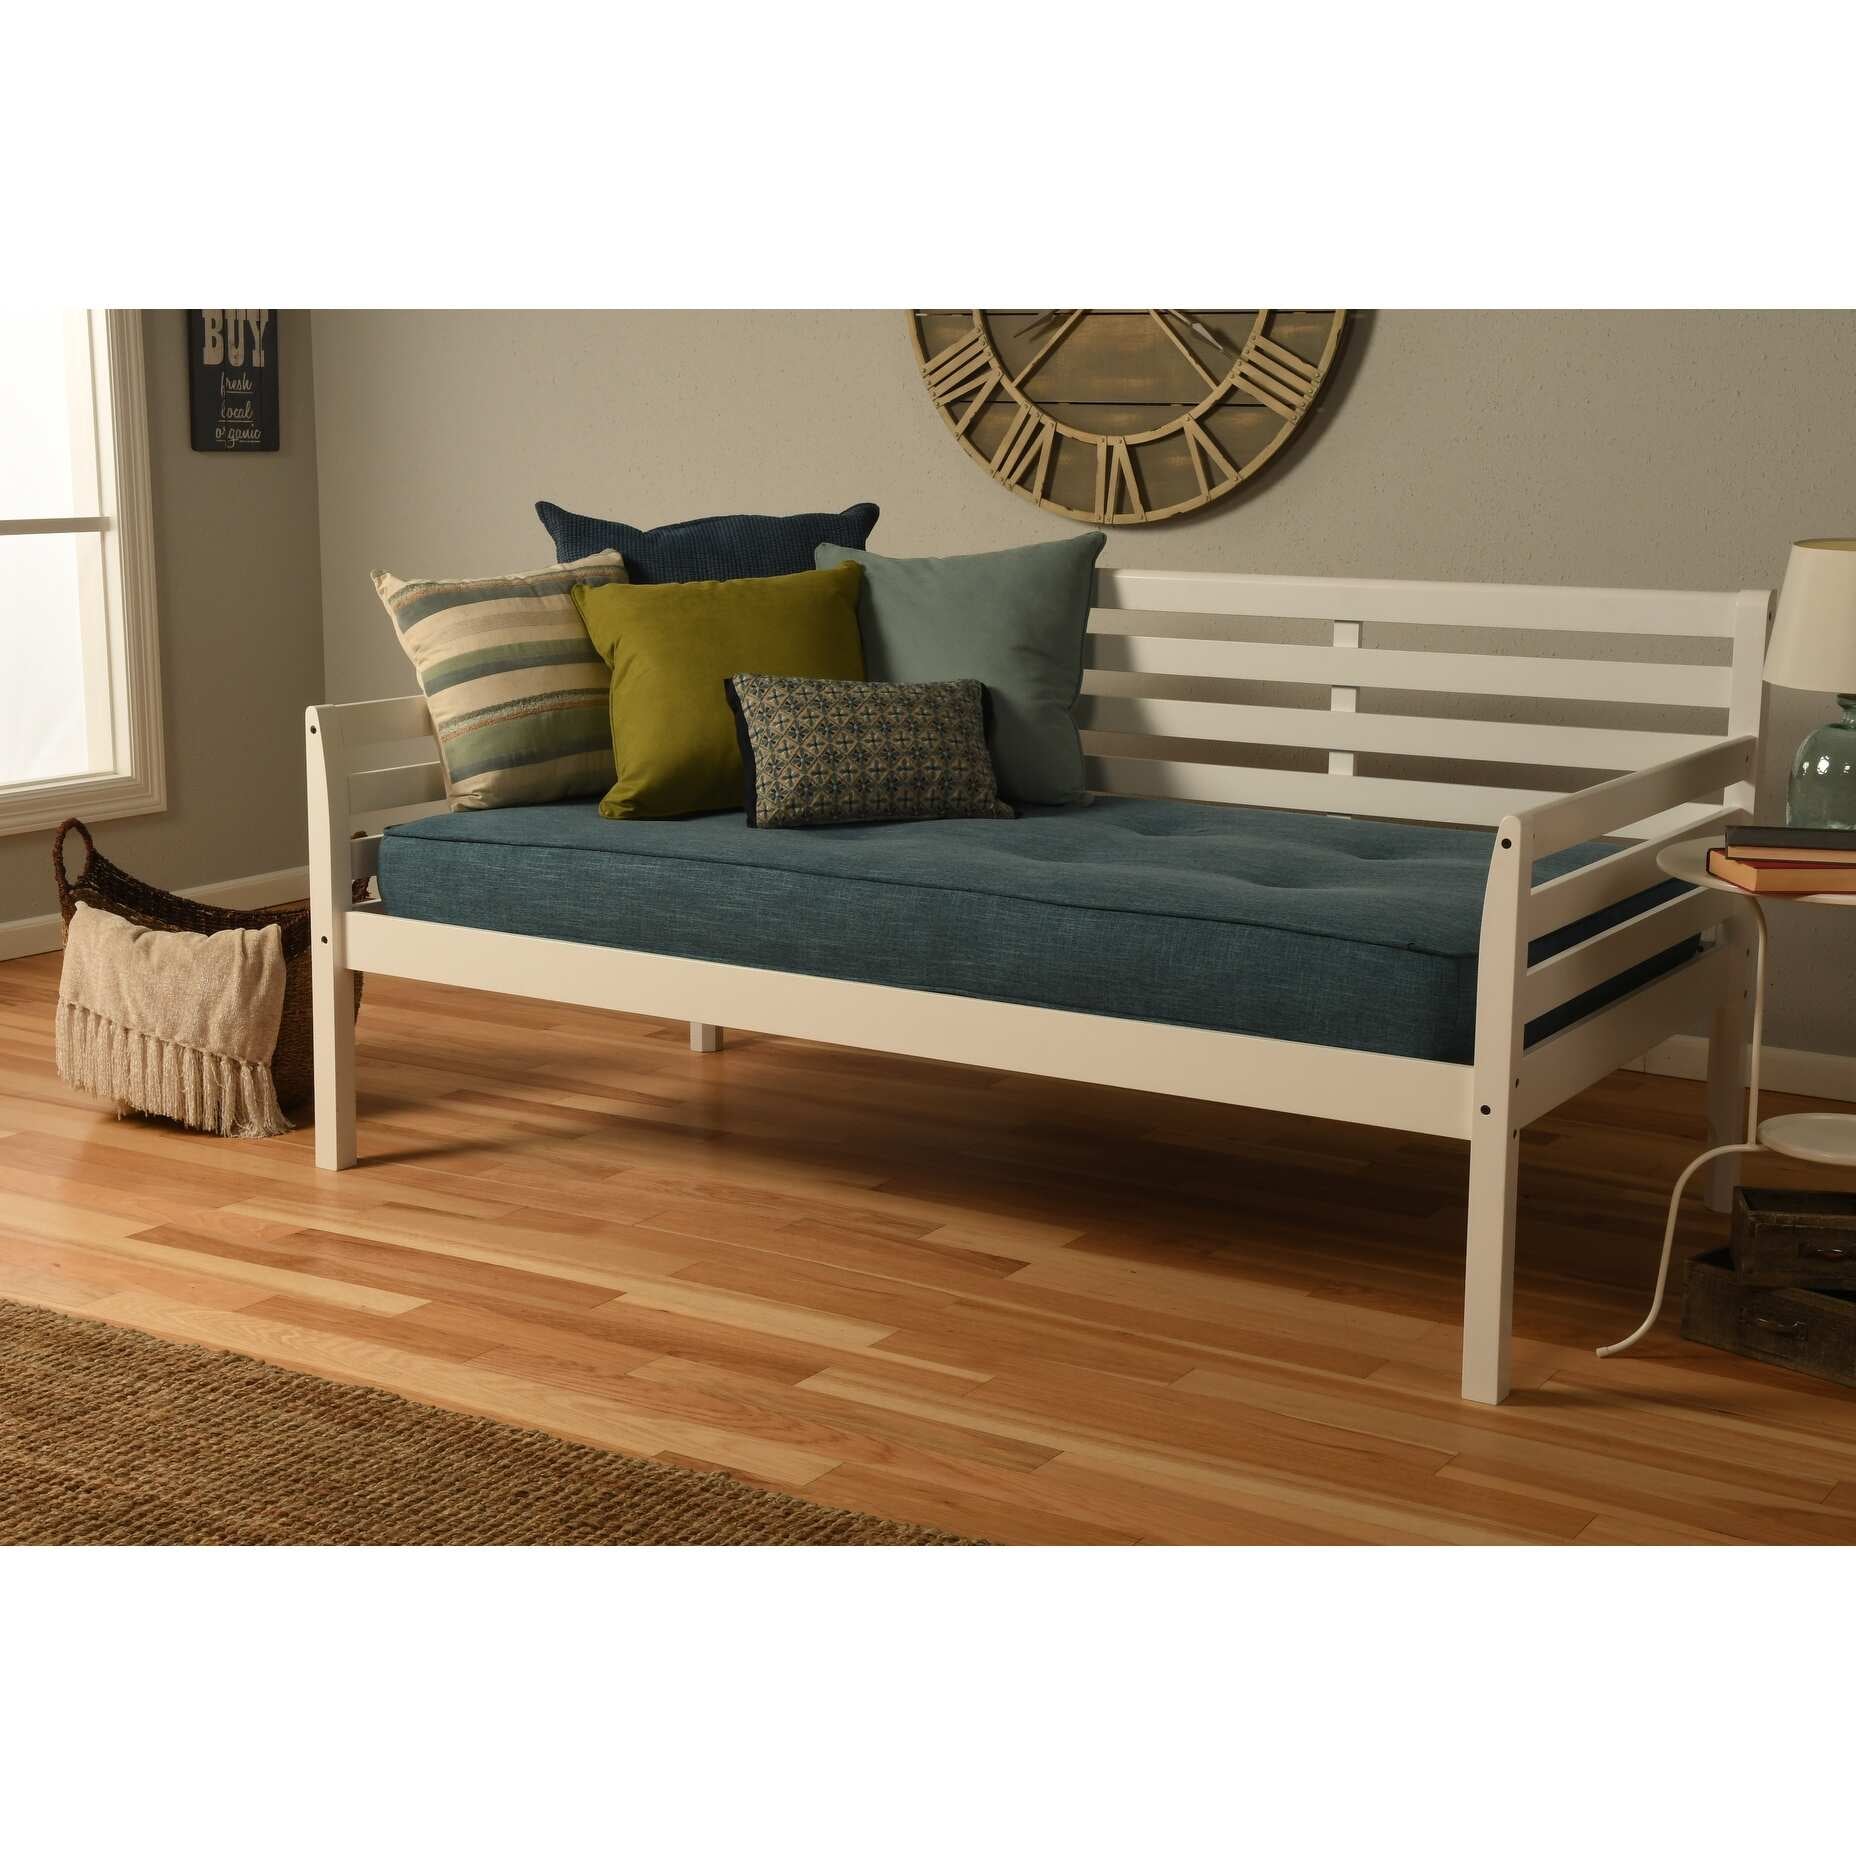 Kutaisi Wood Daybed (Mattress Not Included)